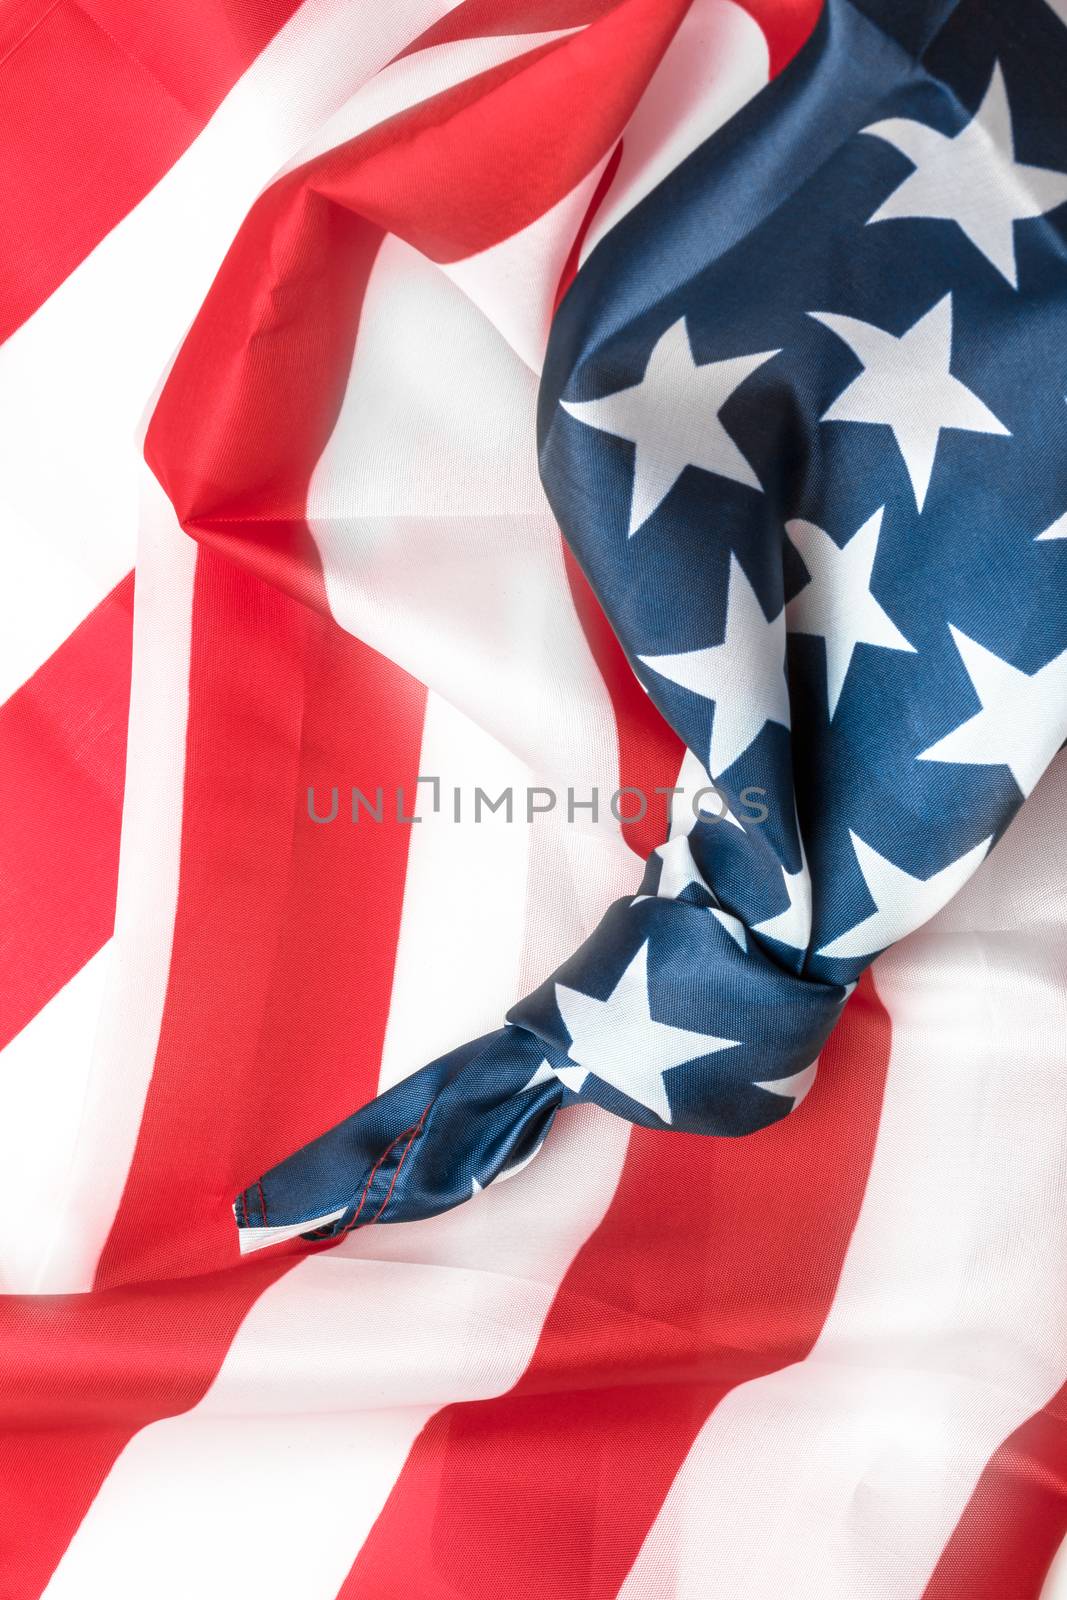 American flag with knot by germanopoli